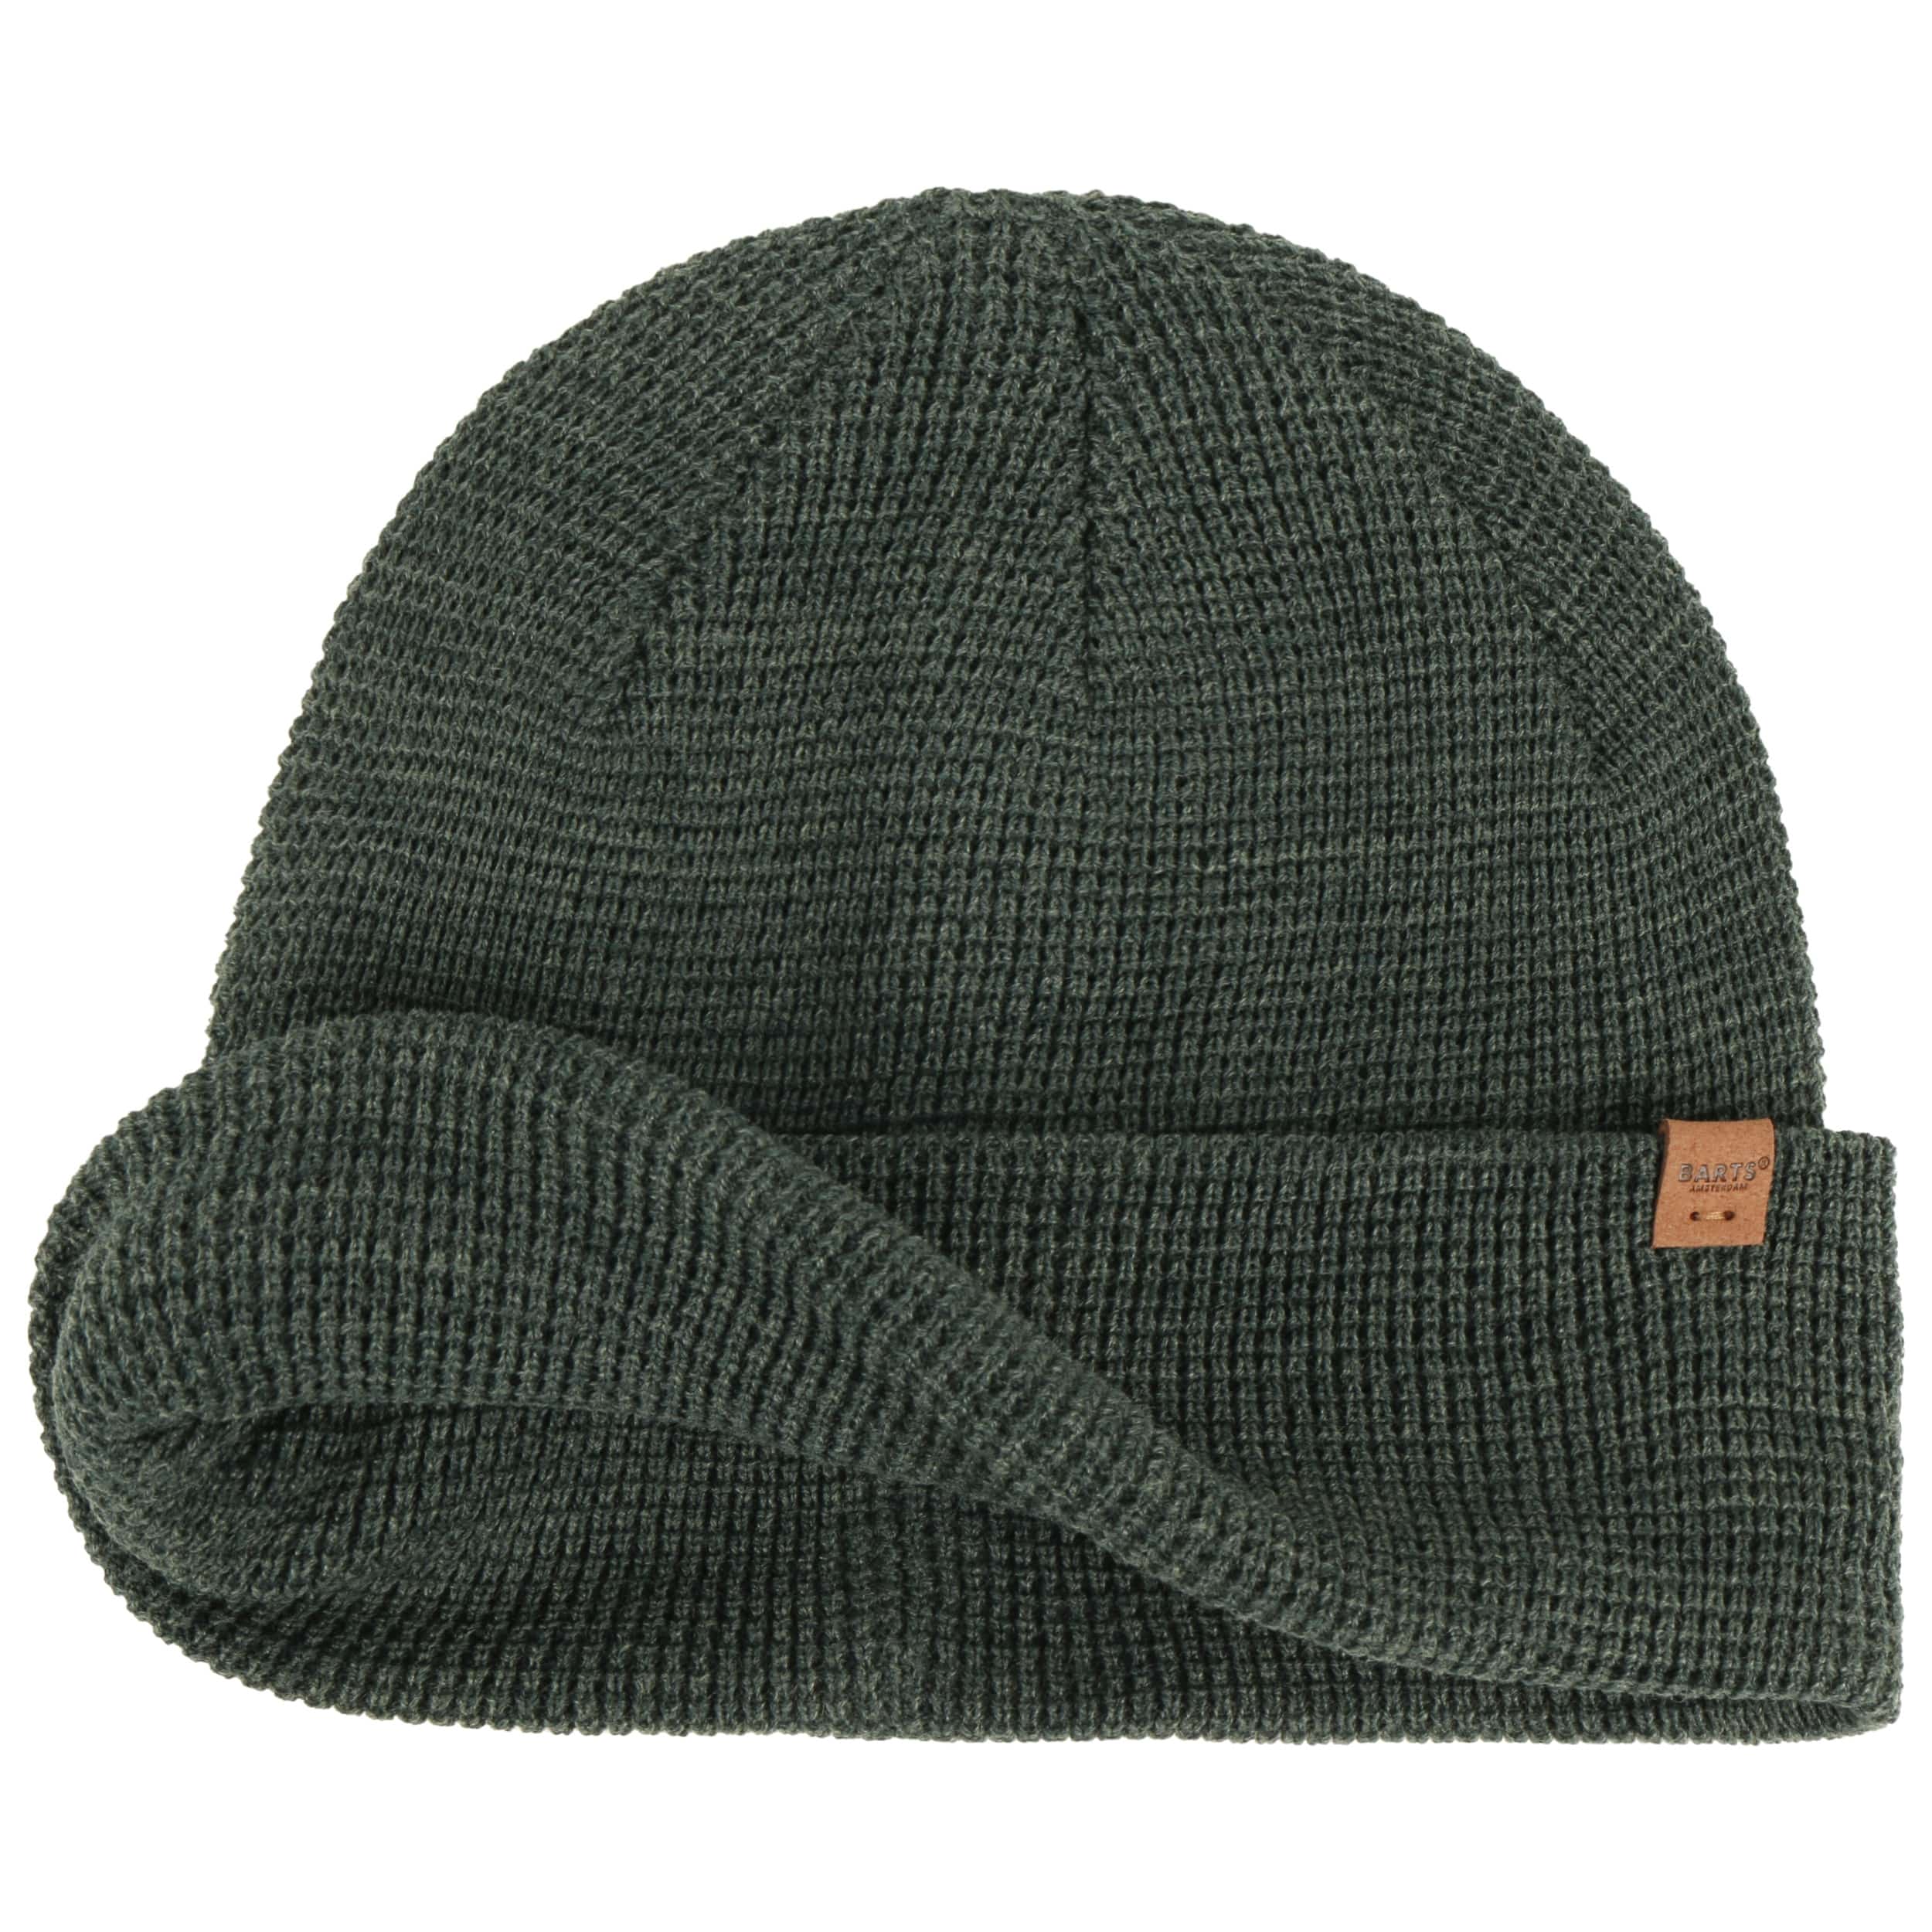 Coler Beanie Hat 22,95 £ by Barts 